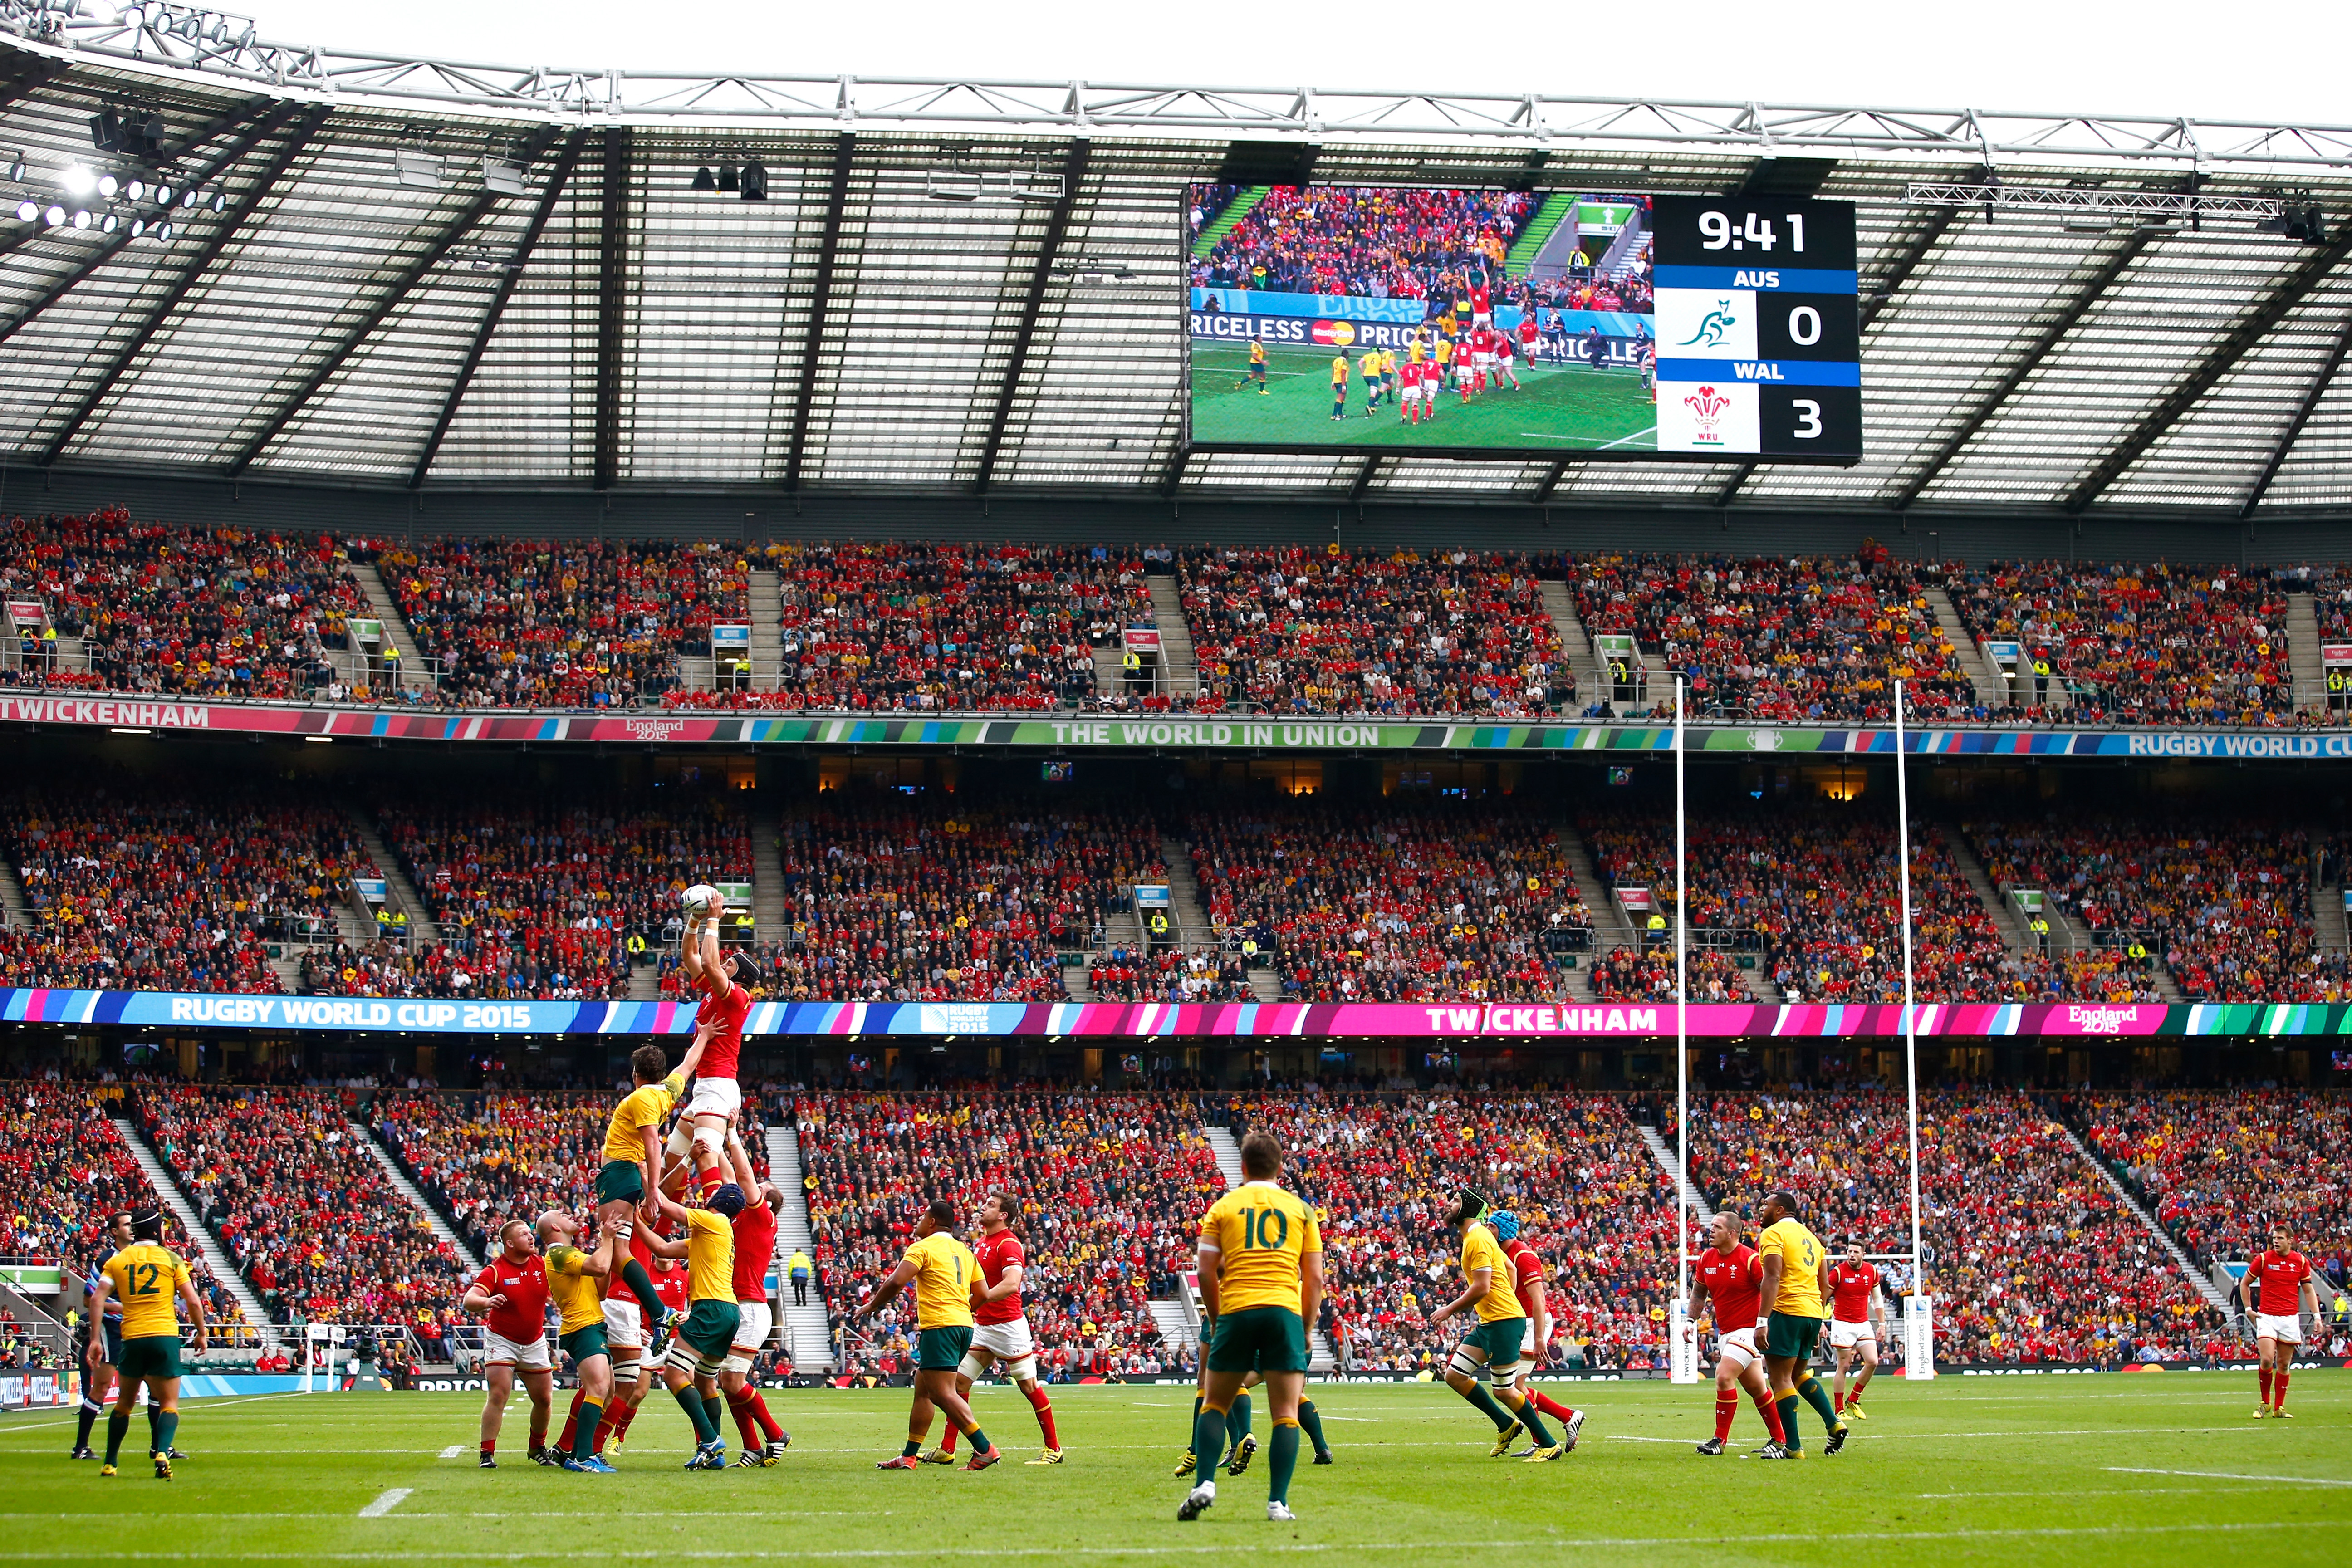 A lineout during the 2015 Rugby World Cup Pool A match between Australia and Wales at Twickenham Stadium in London.